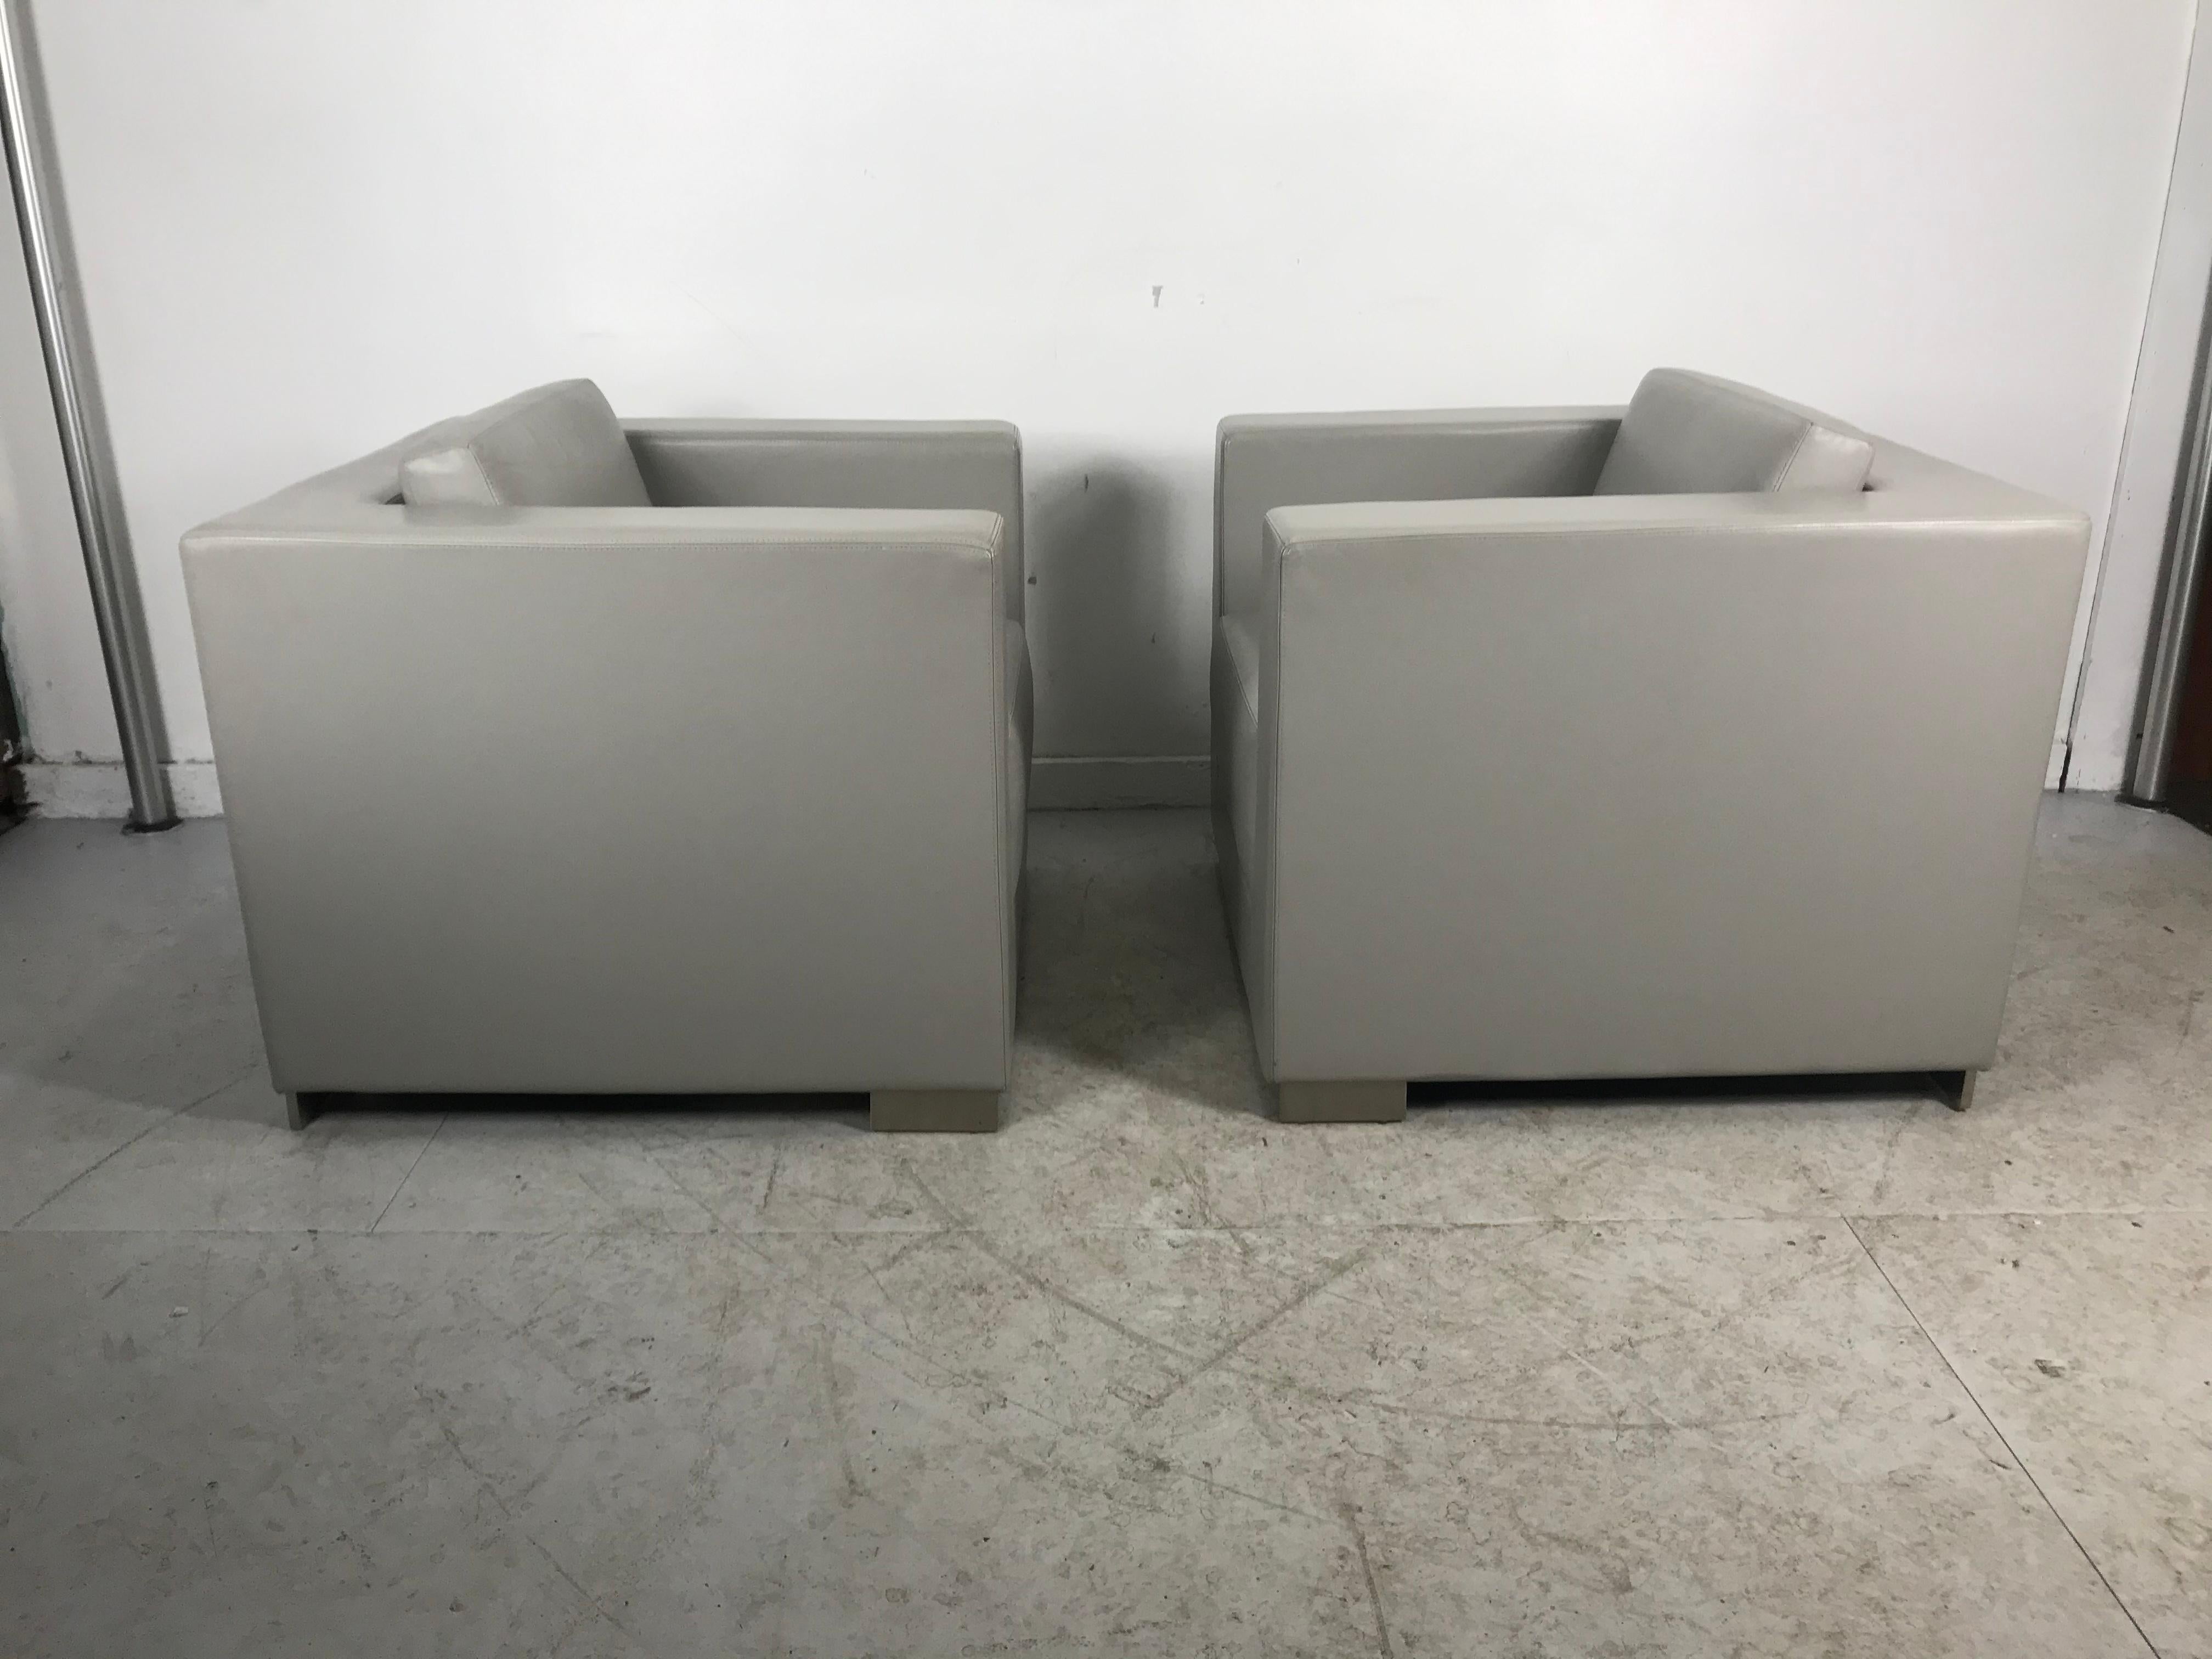 Art Deco Stunning Pair of Leather Cube Lounge Chairs by Fabien Baron for Bernhardt Design